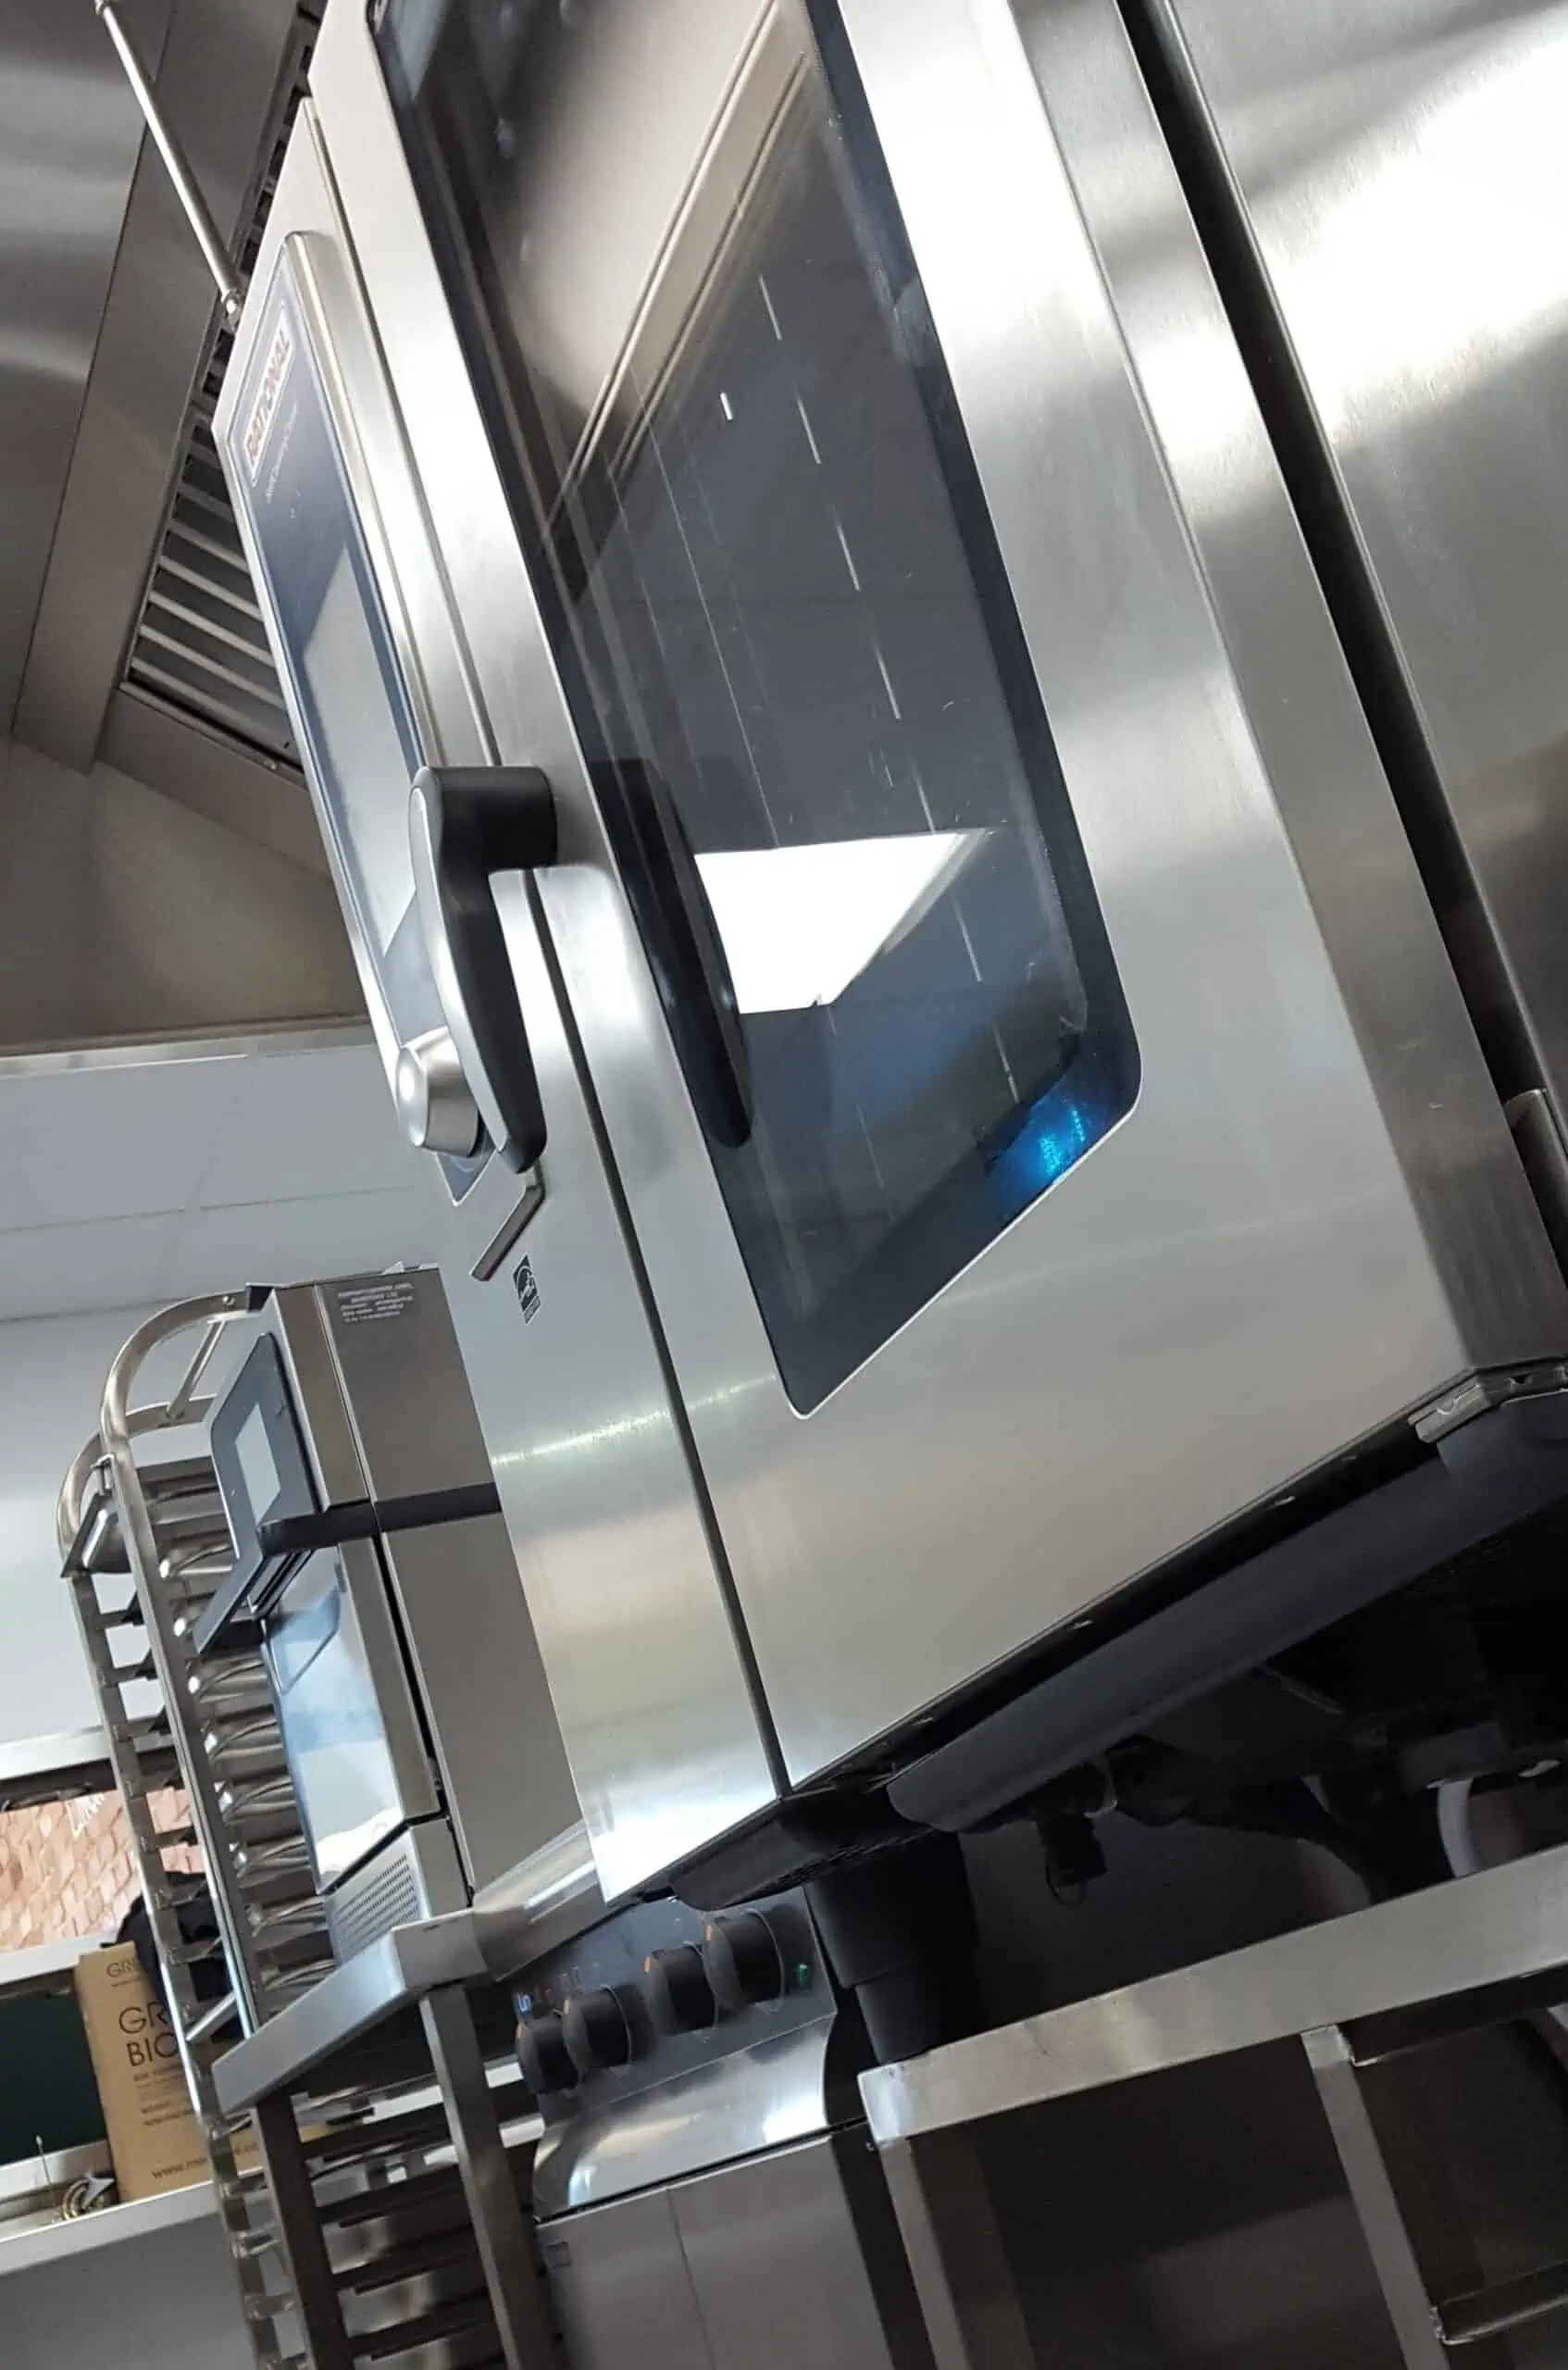 Low angle shot of convection oven supplied by Abraxas,